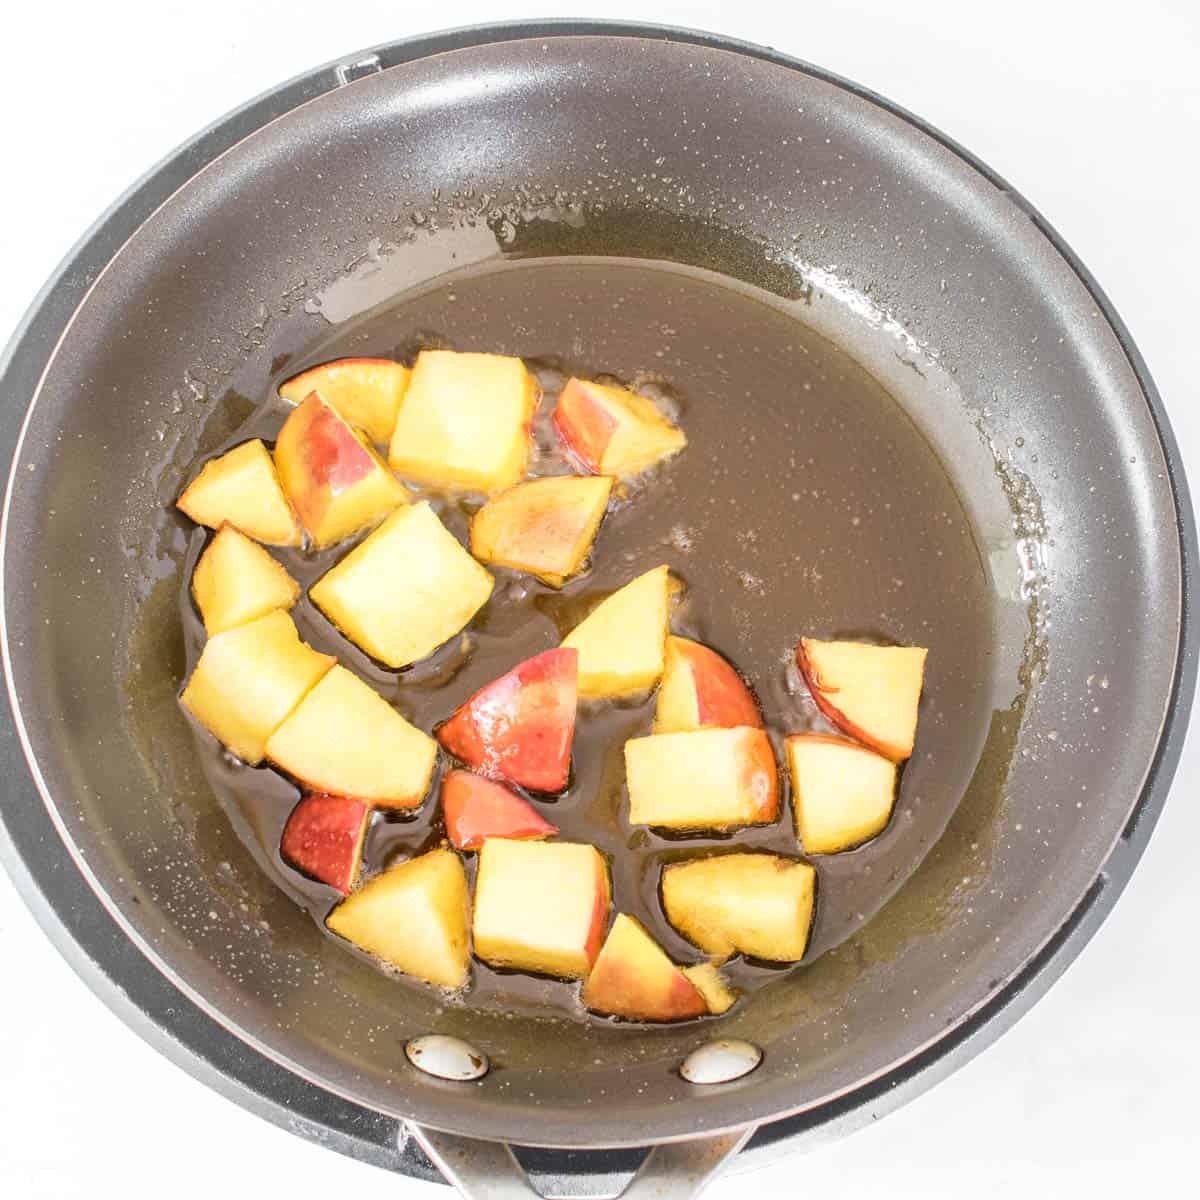 cooked apples in the pan.